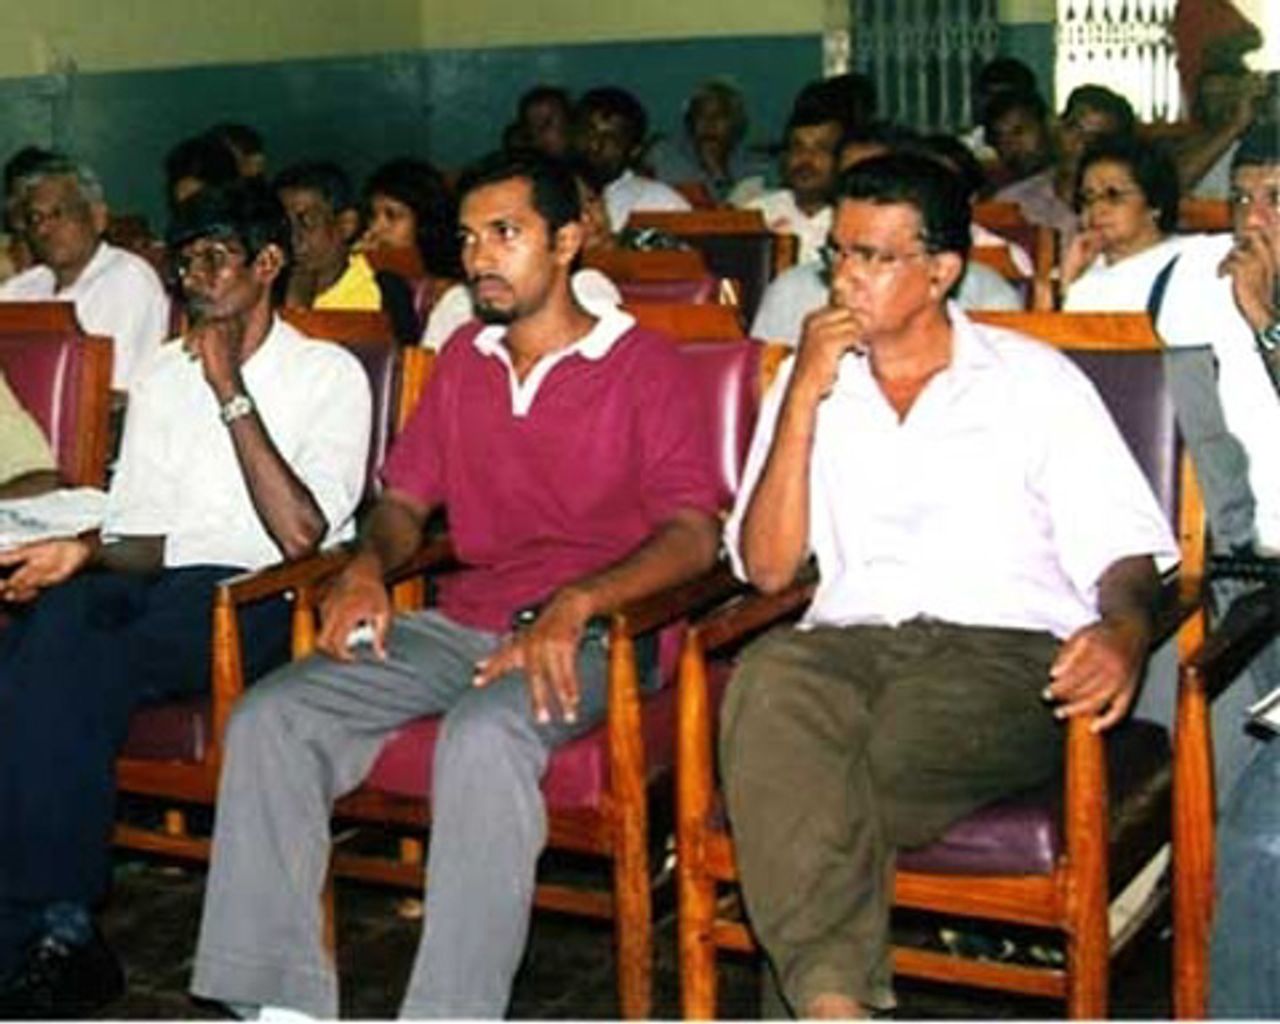 A section of the Galle meeting